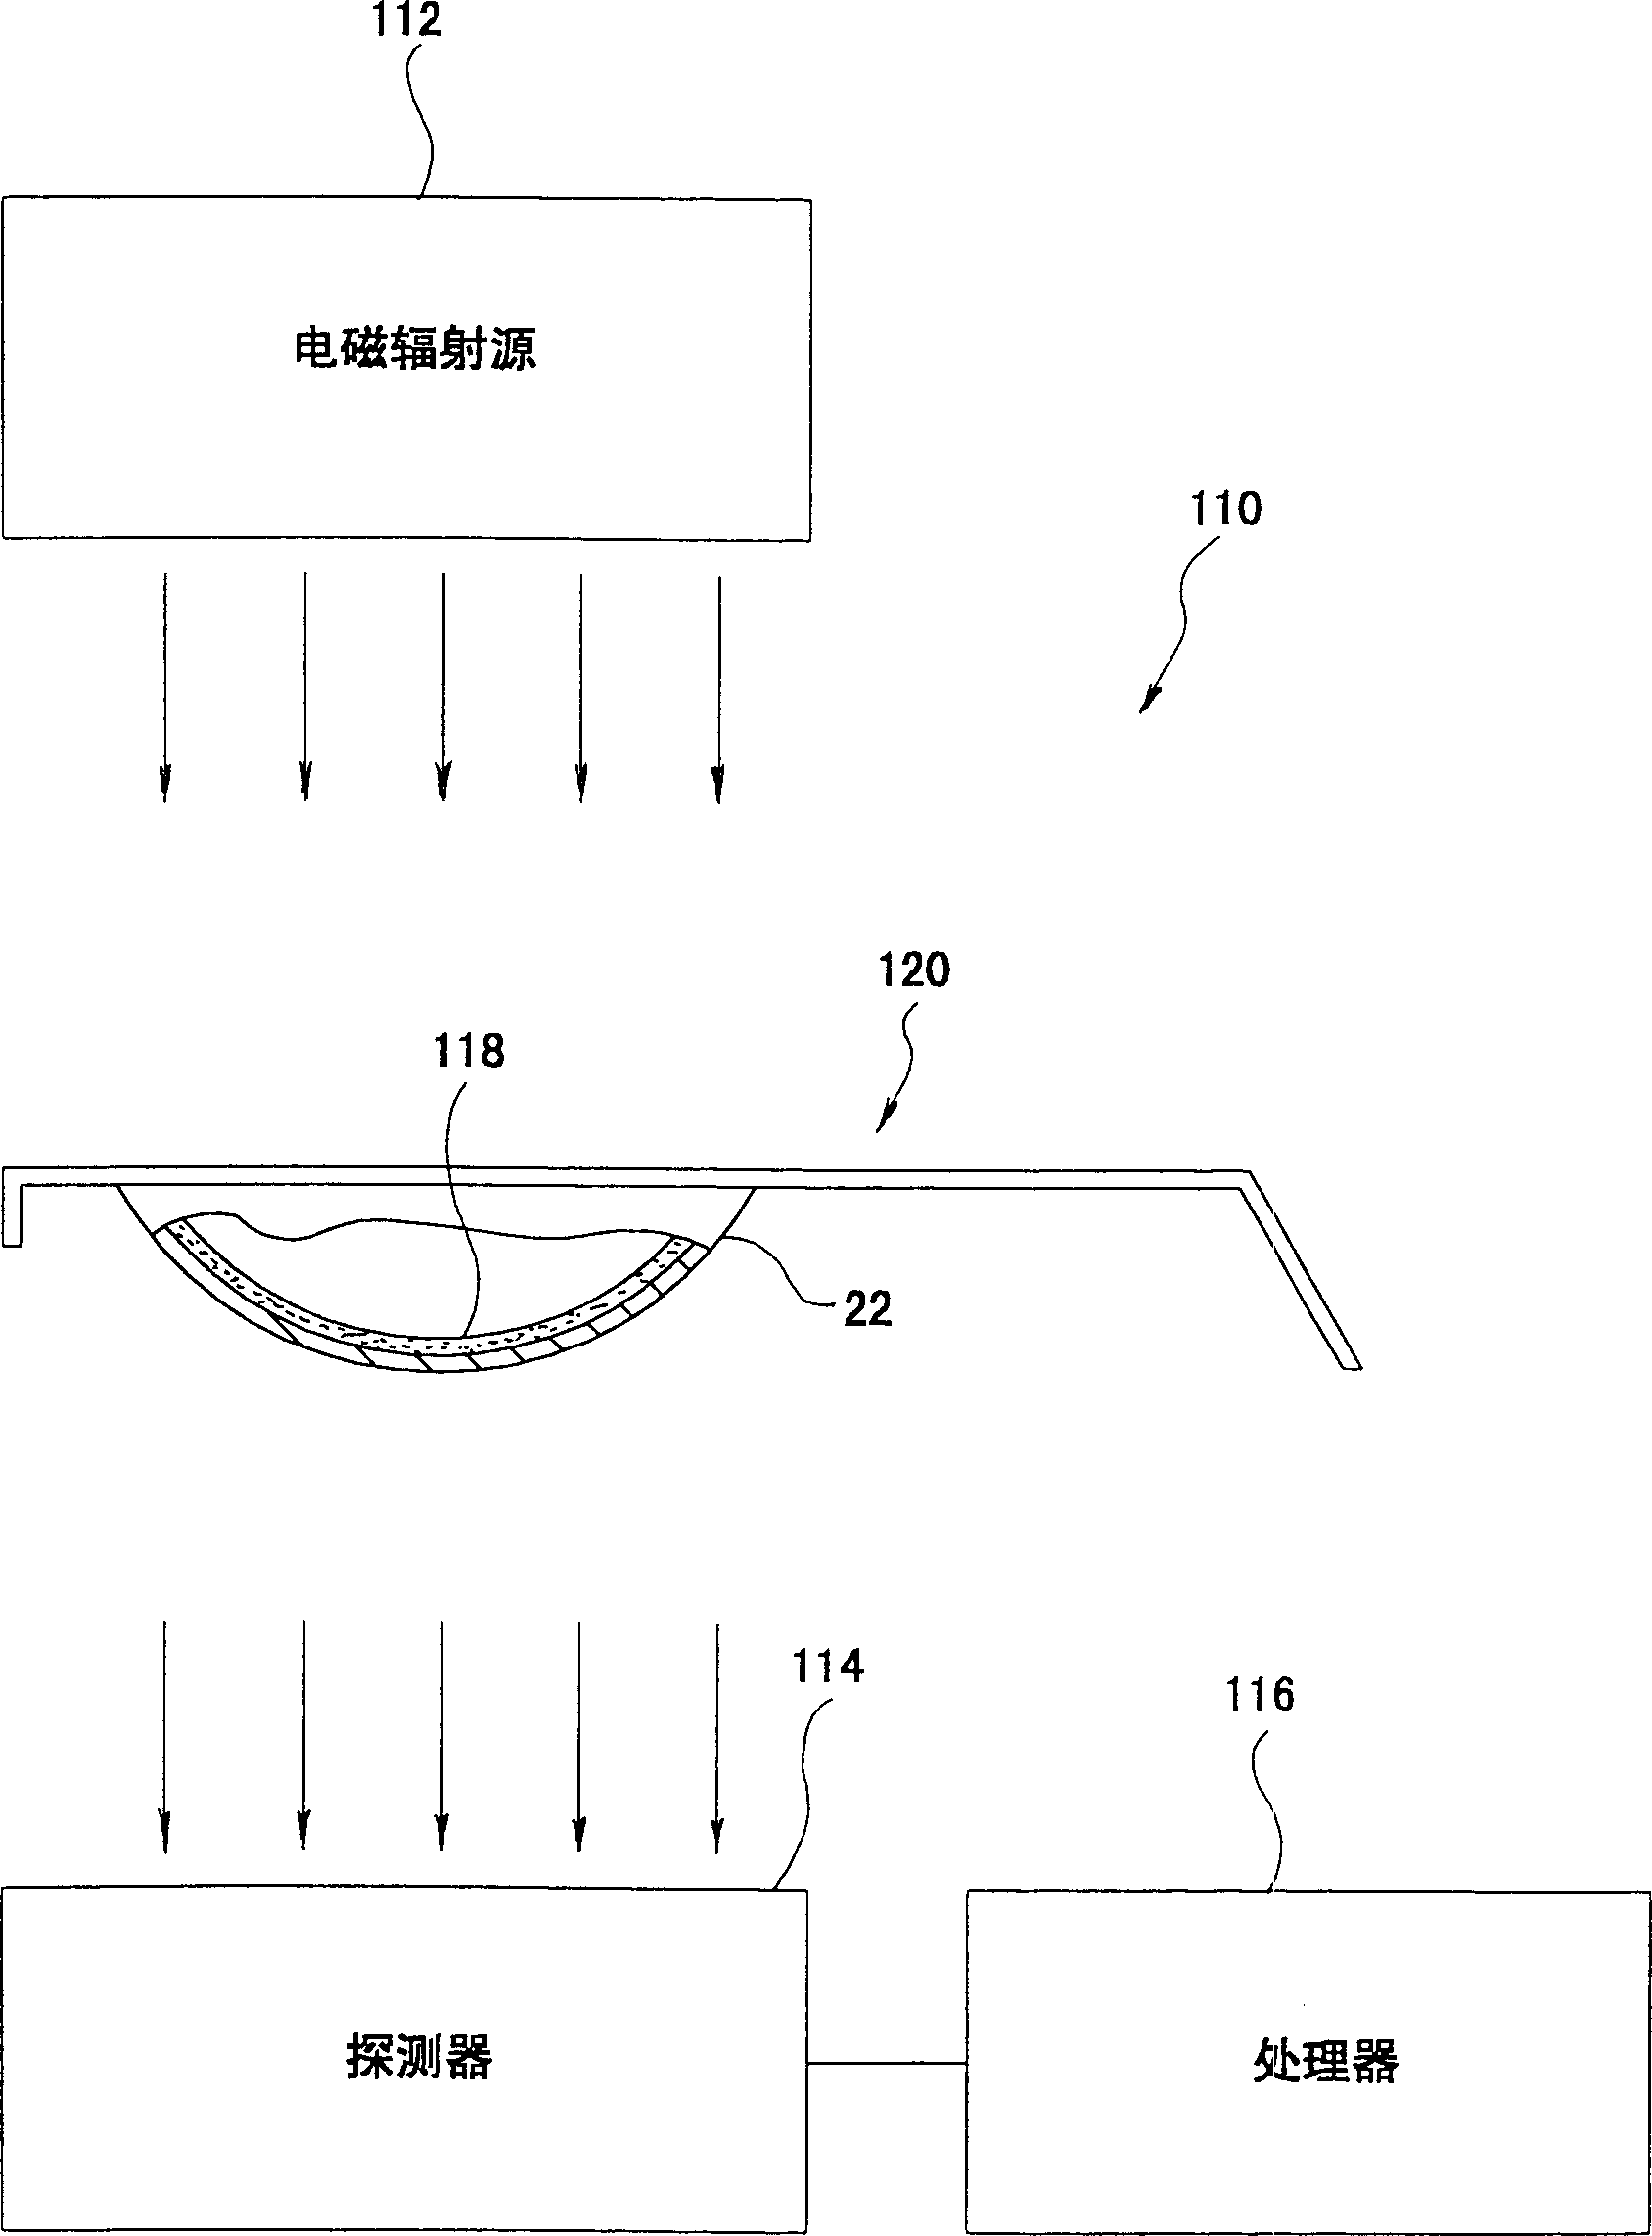 Detecting system and method for lack of lens